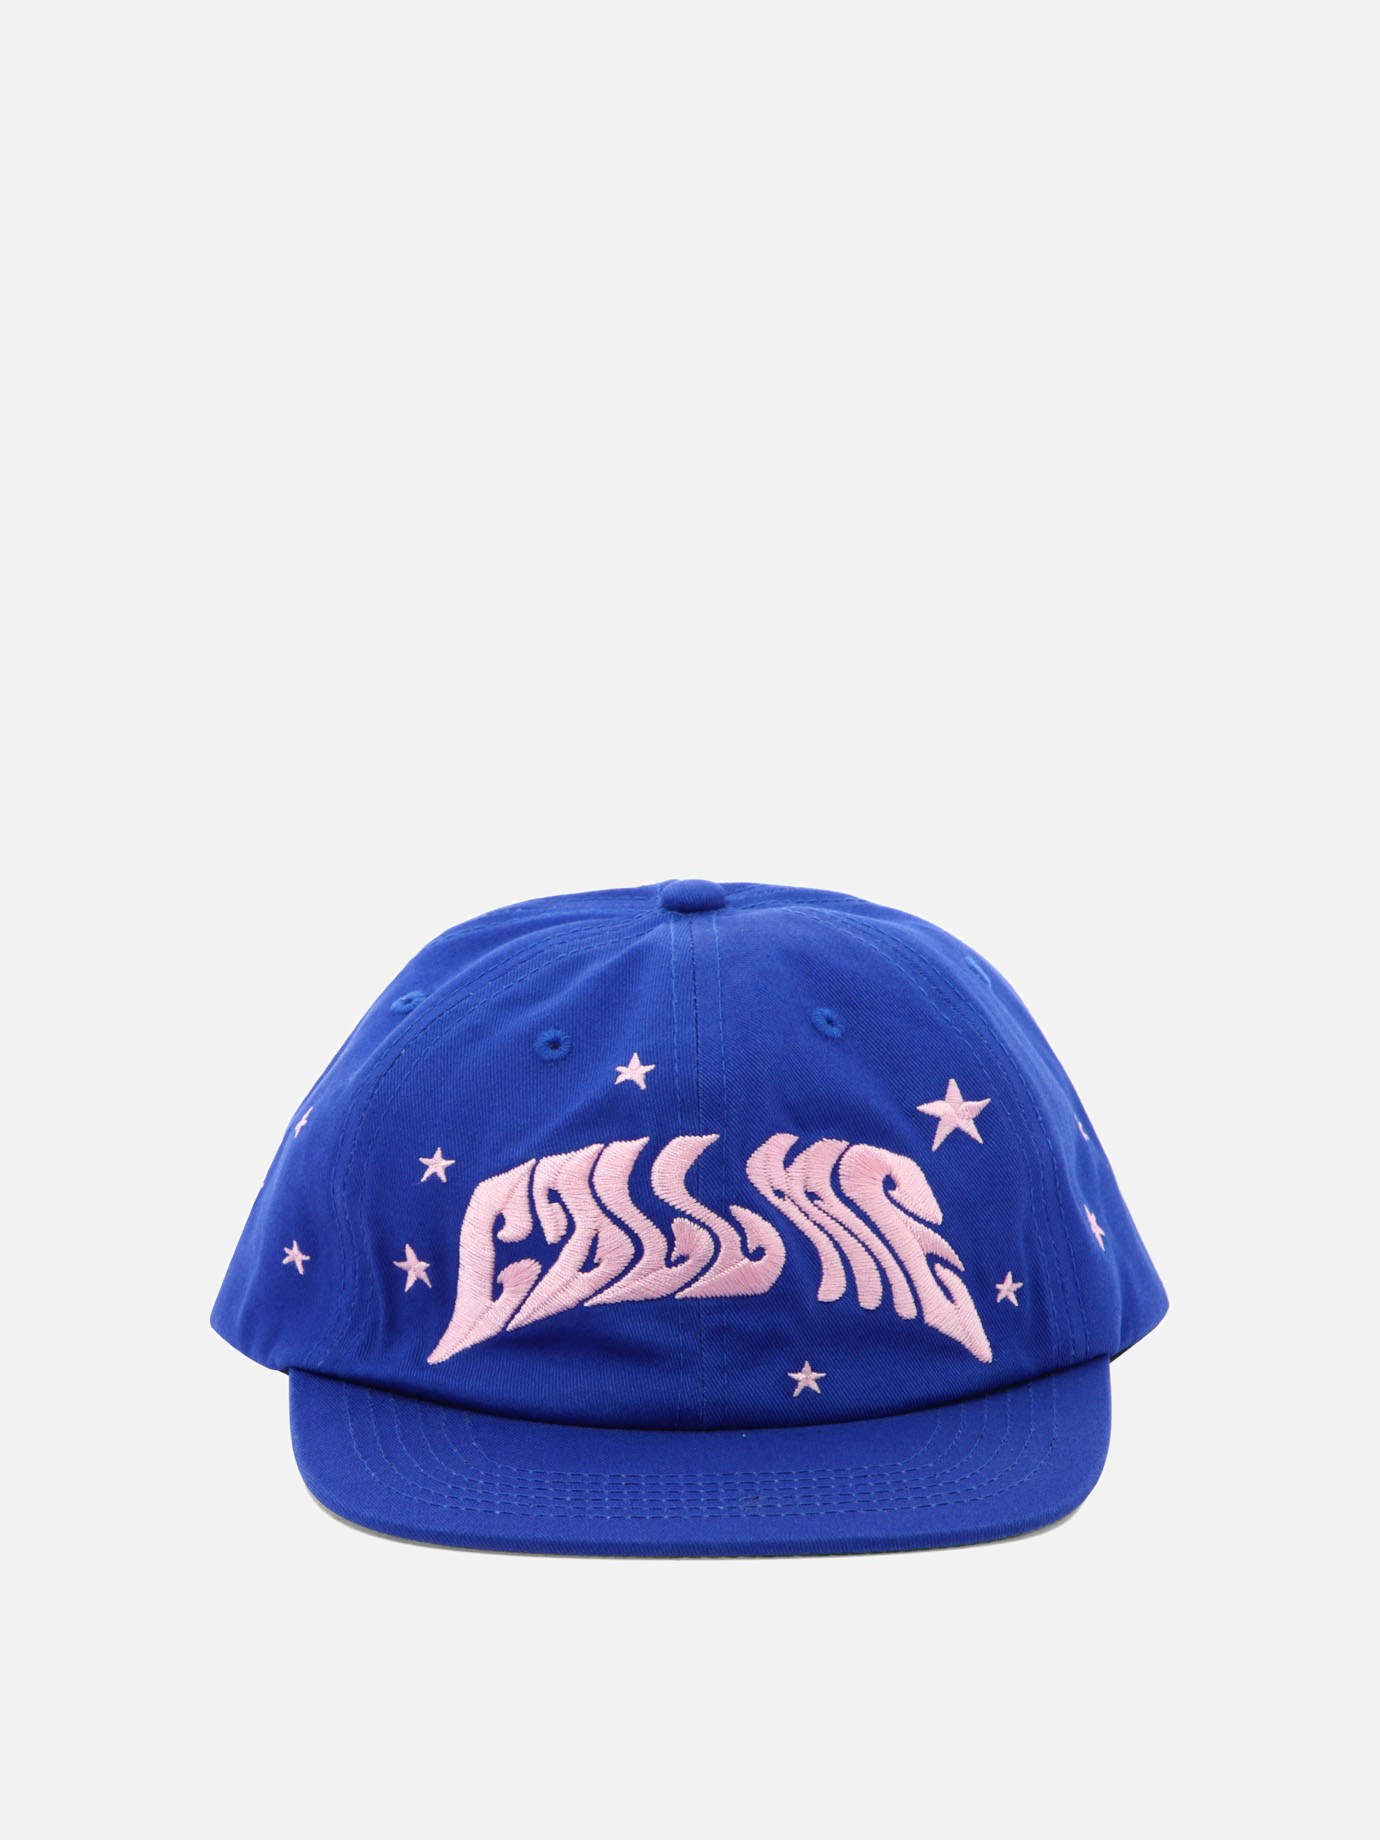 Cappellino  Stars Blue Snapback by Call Me 917 - 2